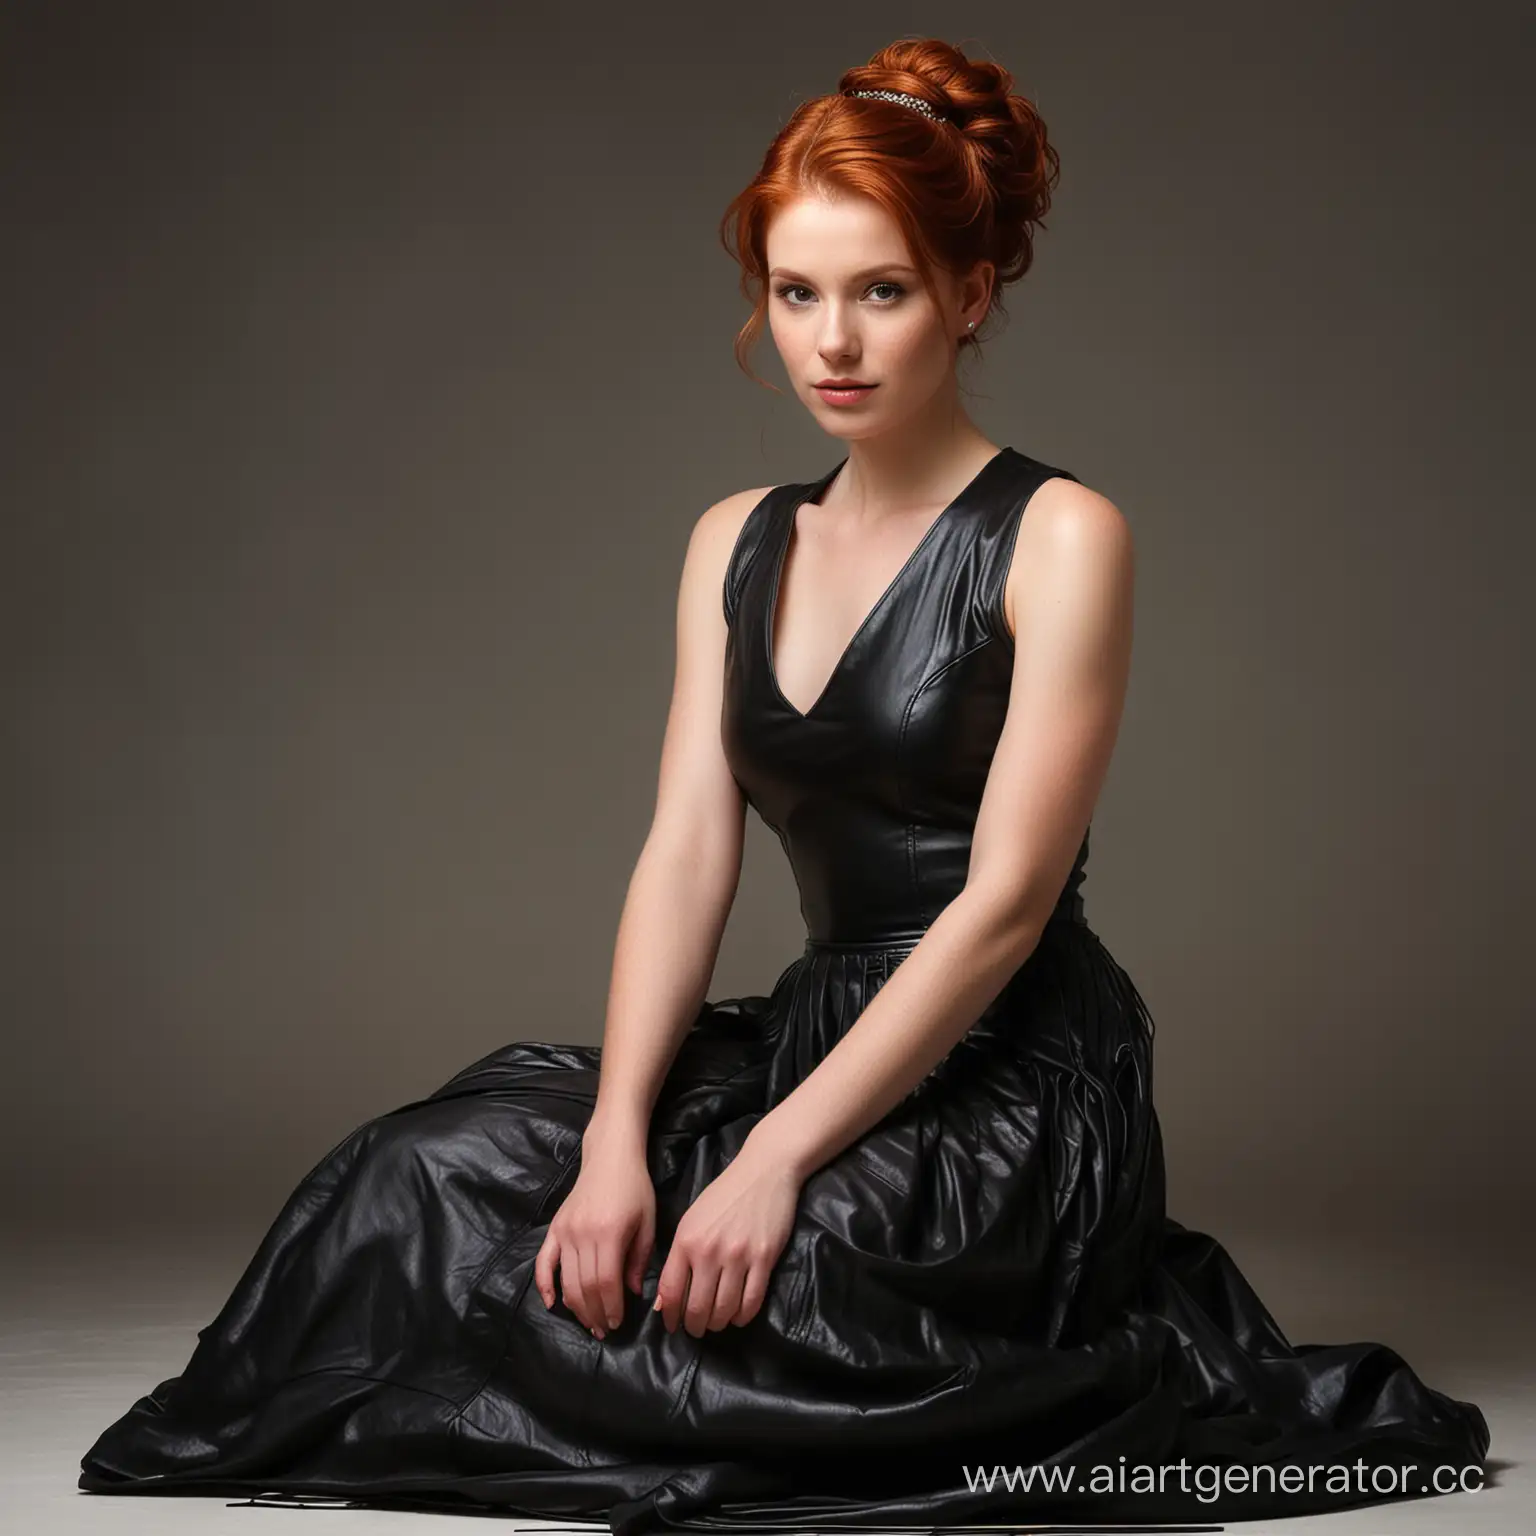 beautiful redhead, approximately 25 years old, exuding elegance, seated gracefully on the floor, adorned in a long leather skirt that cascades around her, contrasting with the soft textures of a minimalist setting, hair styled in intricate updo, soft ambient lighting highlighting the contours of her attire, composition focused on the nuances of her posture and expression, dramatic lighting, ultra fine, digital painting.